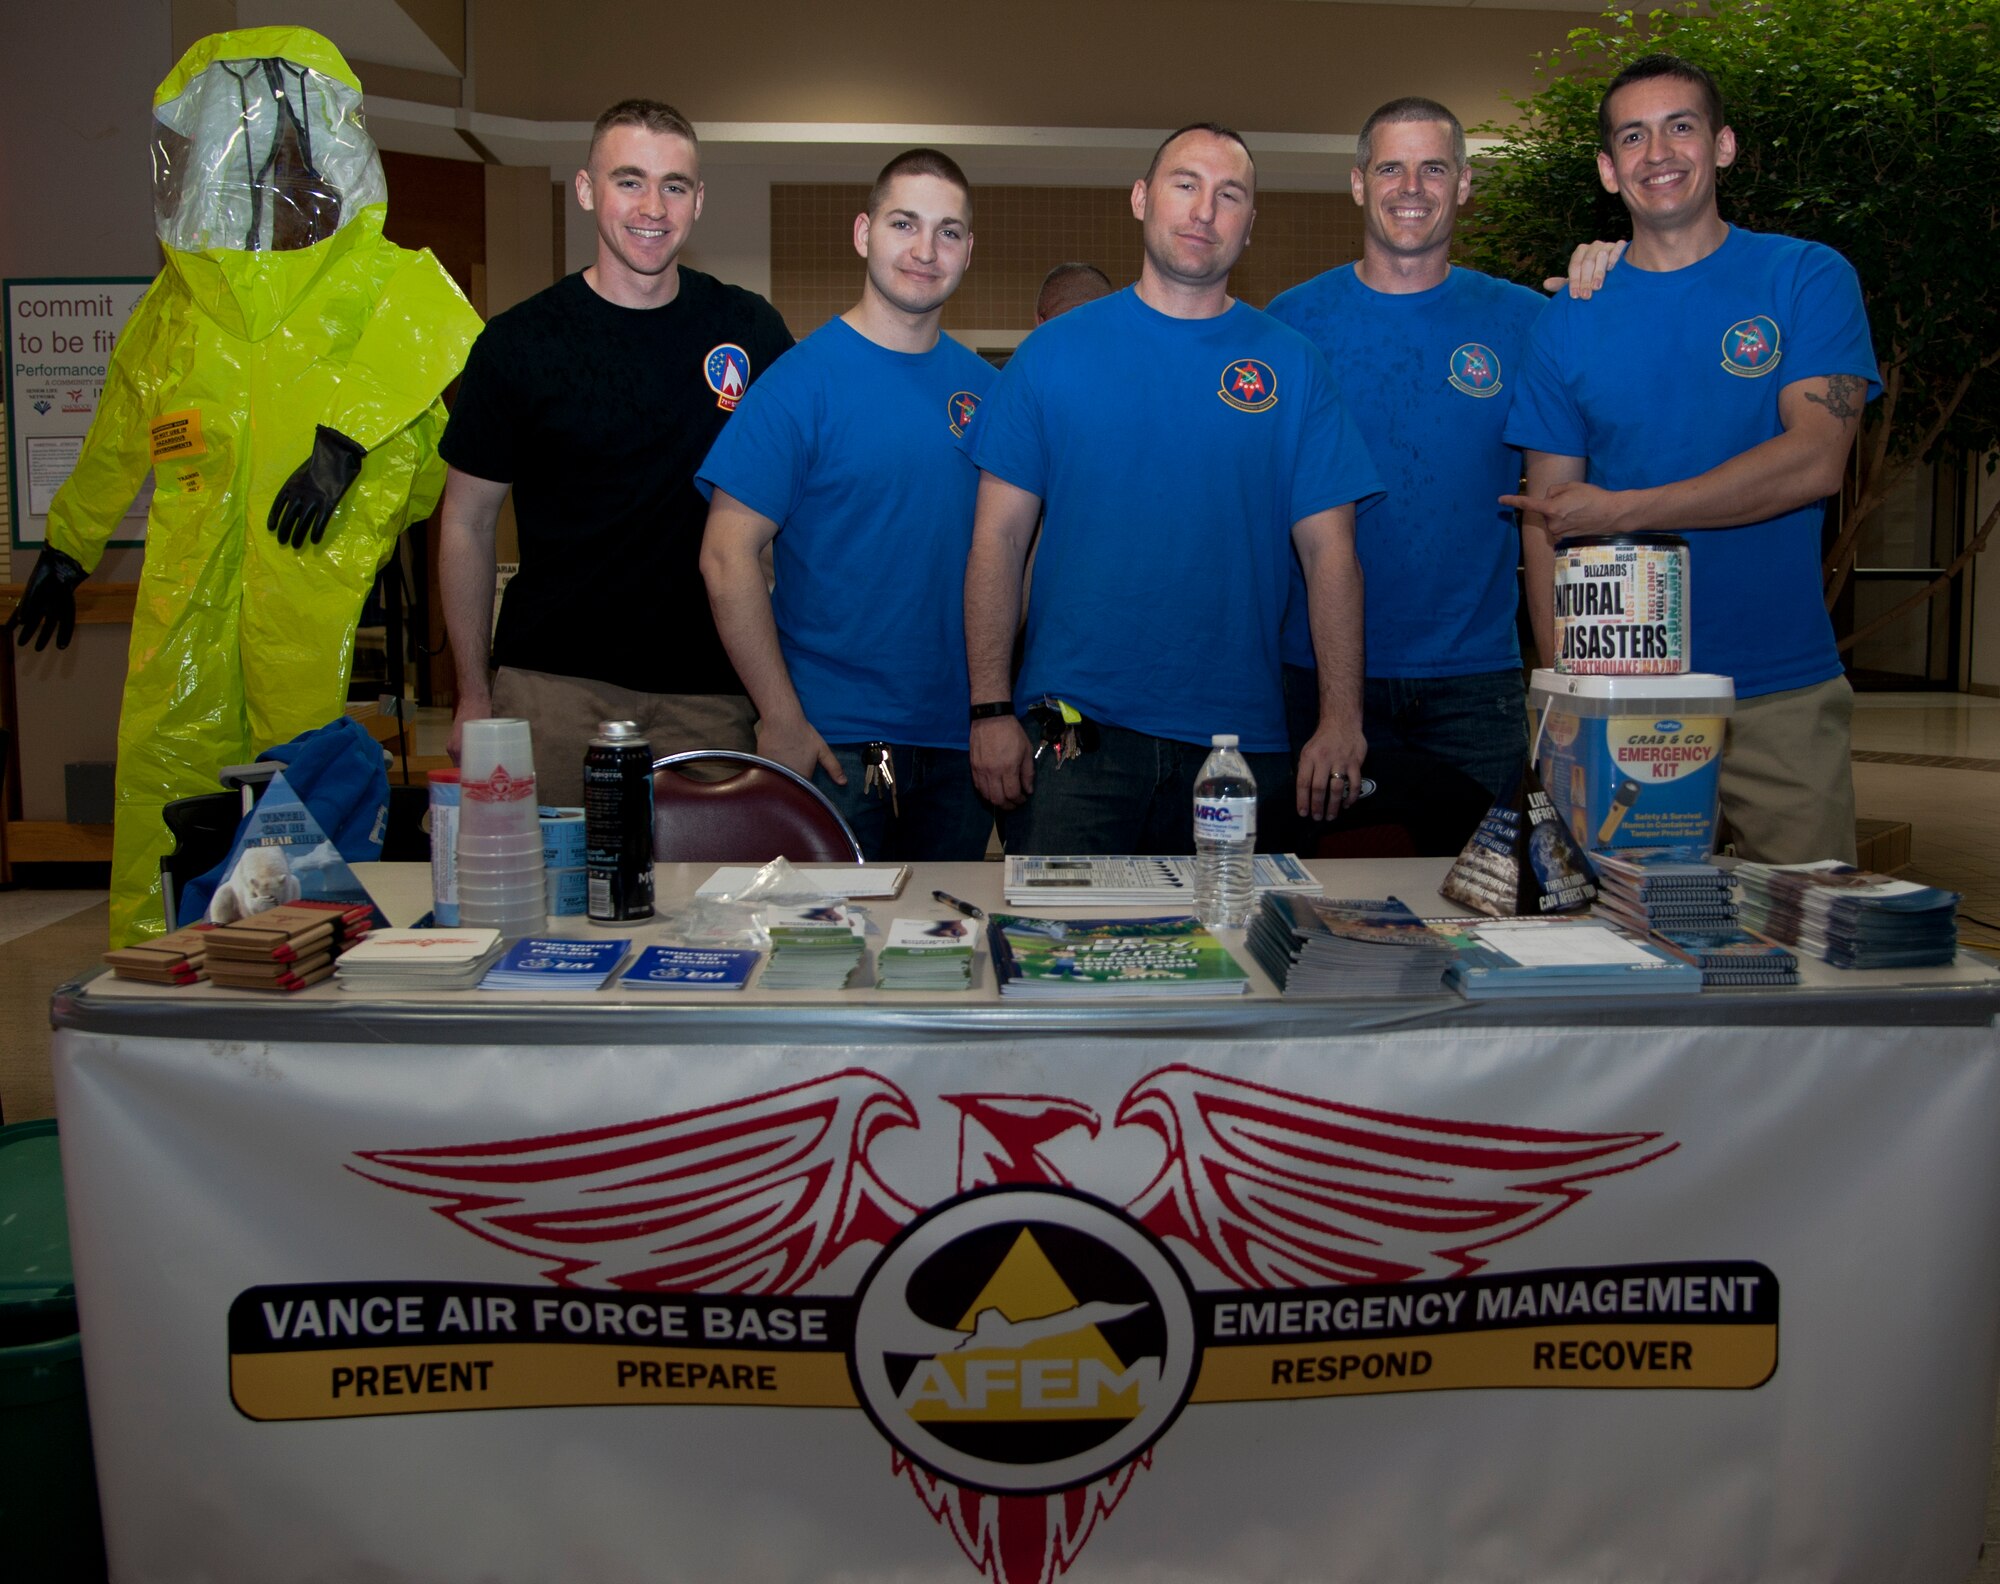 Members from the 71st Logistics Readiness Squadron Emergency Management Flight stand in front of their booth during the 4th Annual Weather and Disaster Preparedness Day April 8 at the Oakwood Mall in Enid, Oklahoma. The Airmen joined emergency management personnel from across Garfield County to hand out preparedness information to the local community. (U.S. Air Force Photo/Staff Sgt. Nancy Falcon)